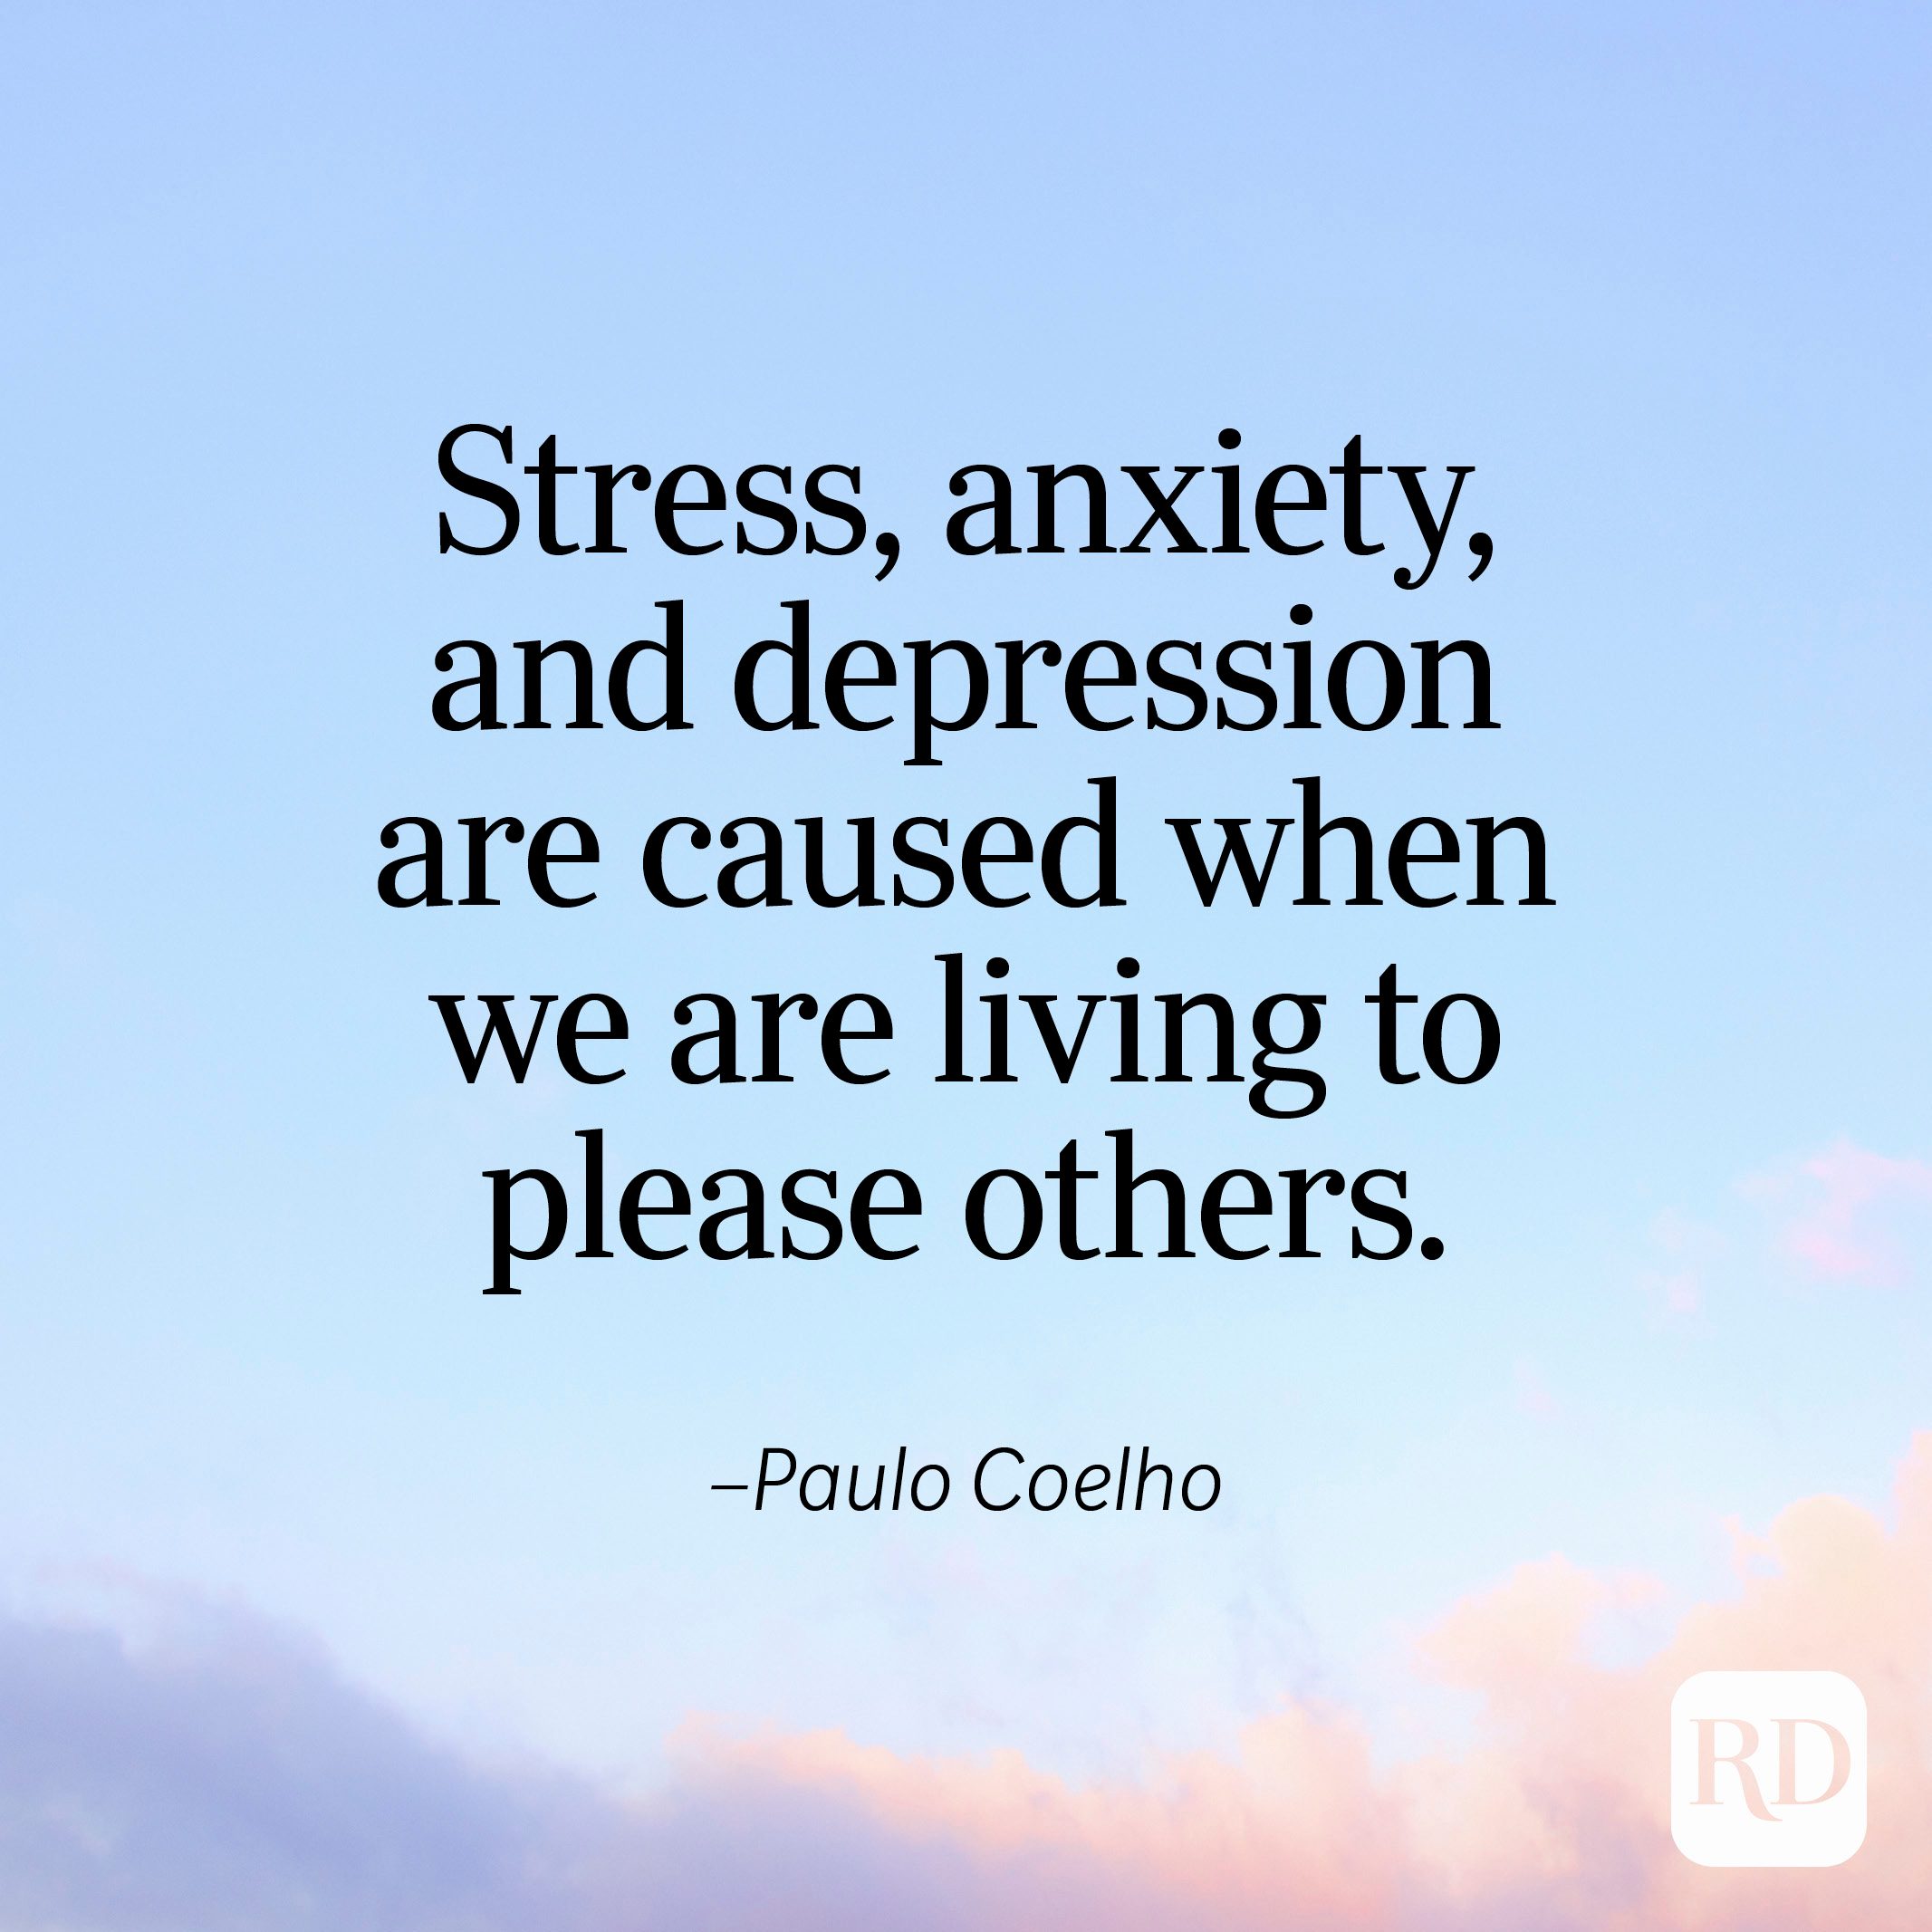 "Stress, anxiety, and depression are caused when we are living to please others." —Paulo Coelho